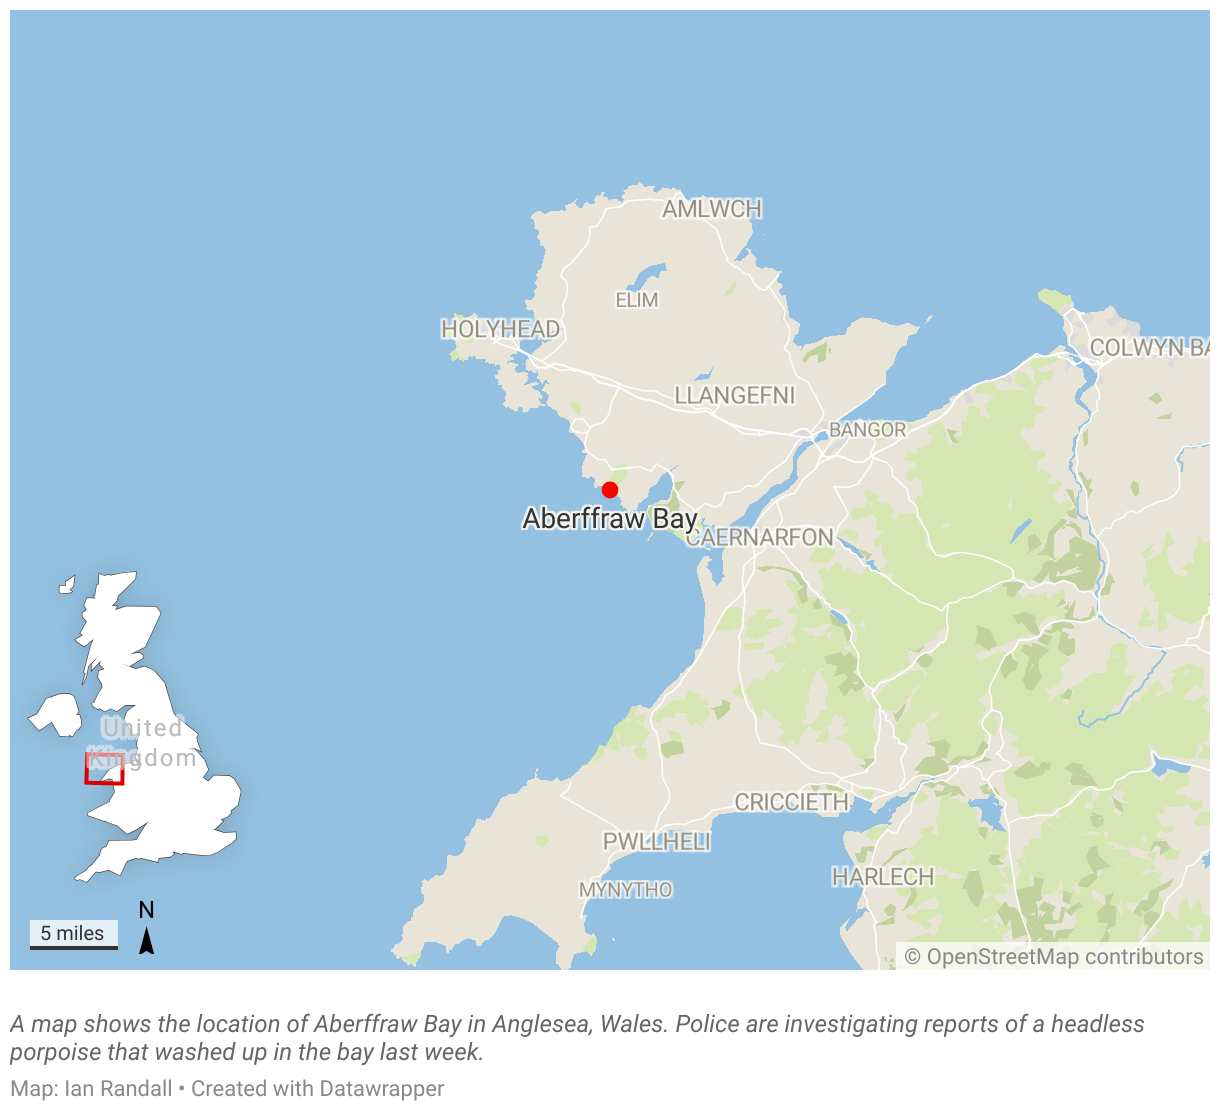 A map shows the location of Aberffraw Bay in Anglesea, Wales.